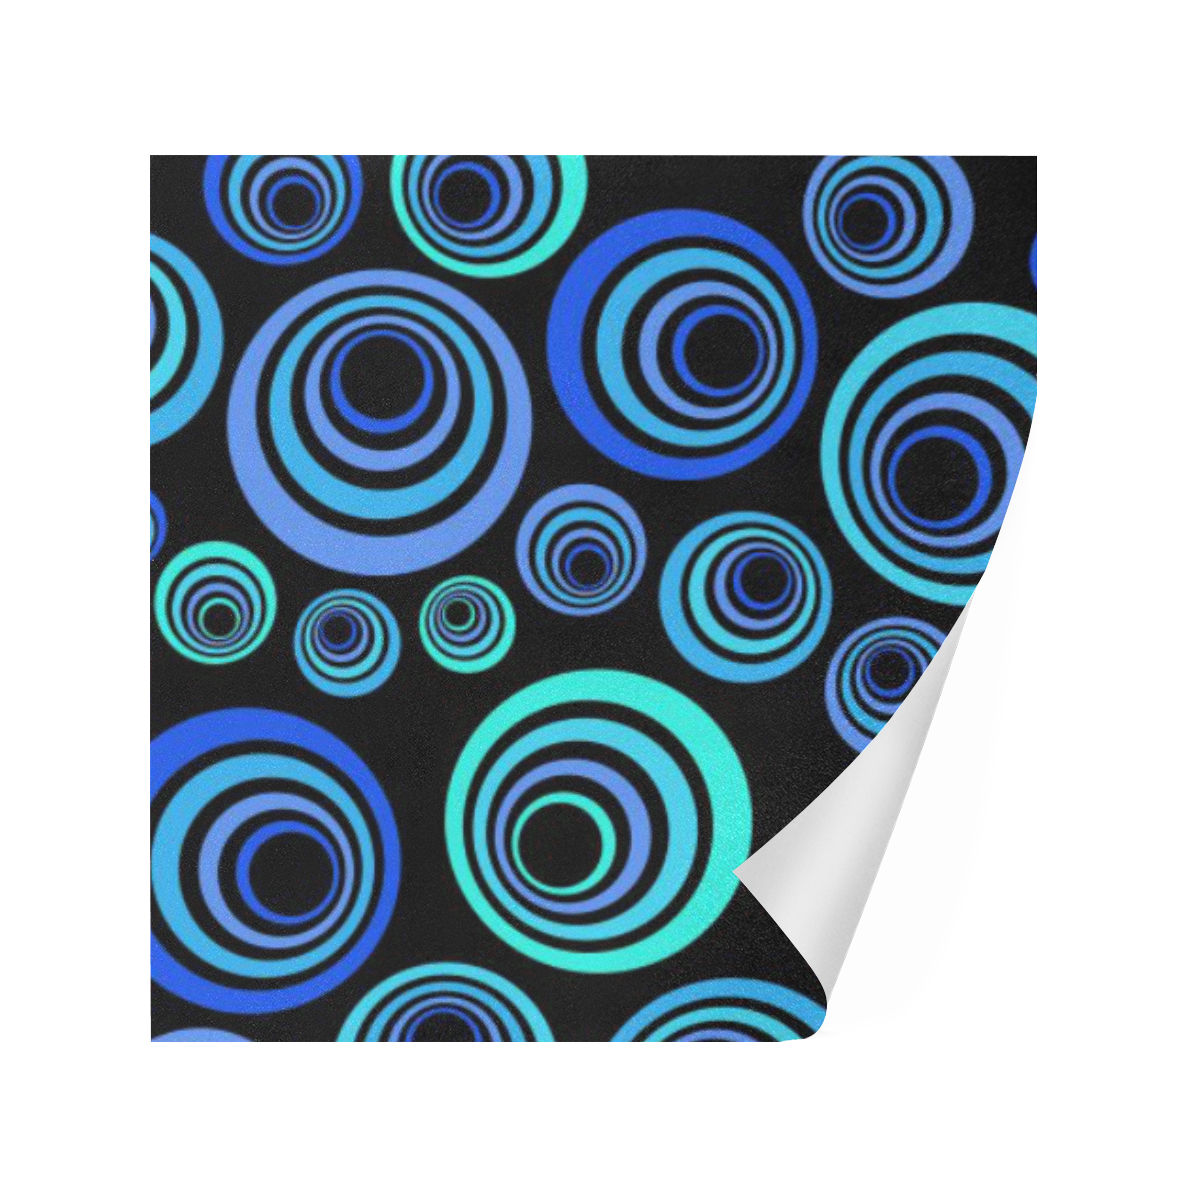 Retro Psychedelic Pretty Blue Pattern Gift Wrapping Paper 58"x 23" (5 Rolls)